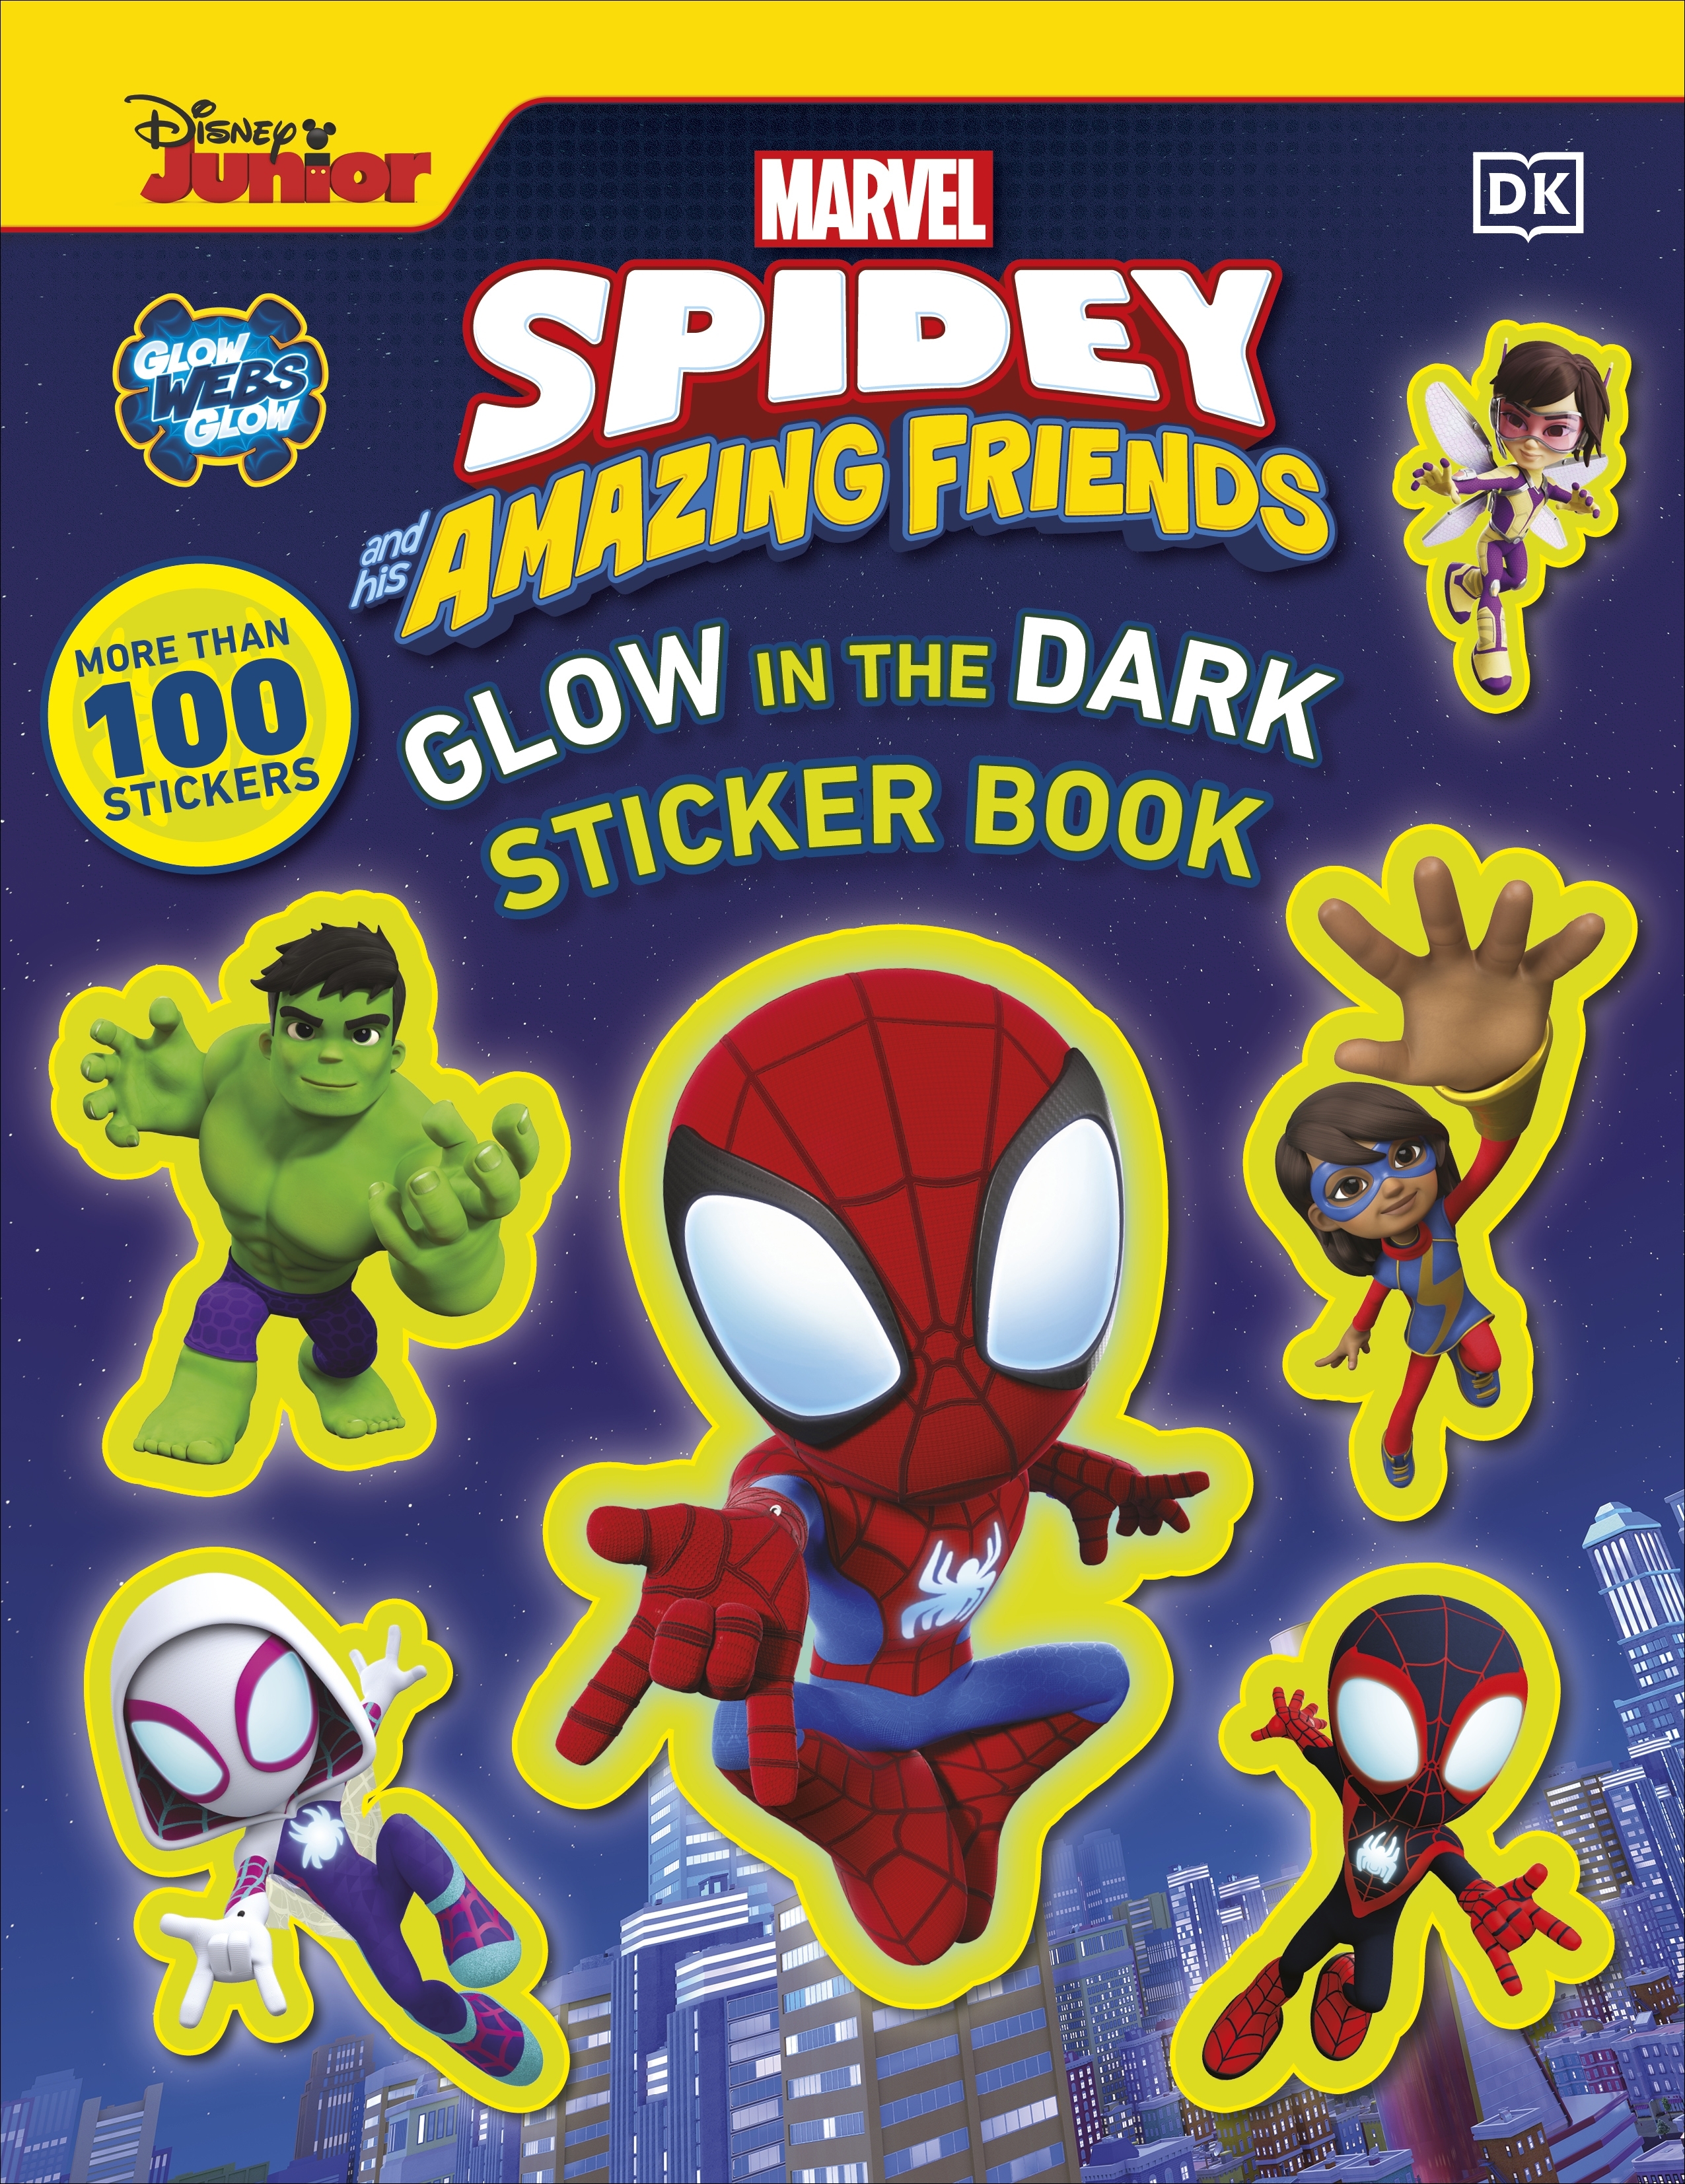 Marvel Spidey and His Amazing Friends Glow in the Dark Sticker Book by DK -  Penguin Books Australia